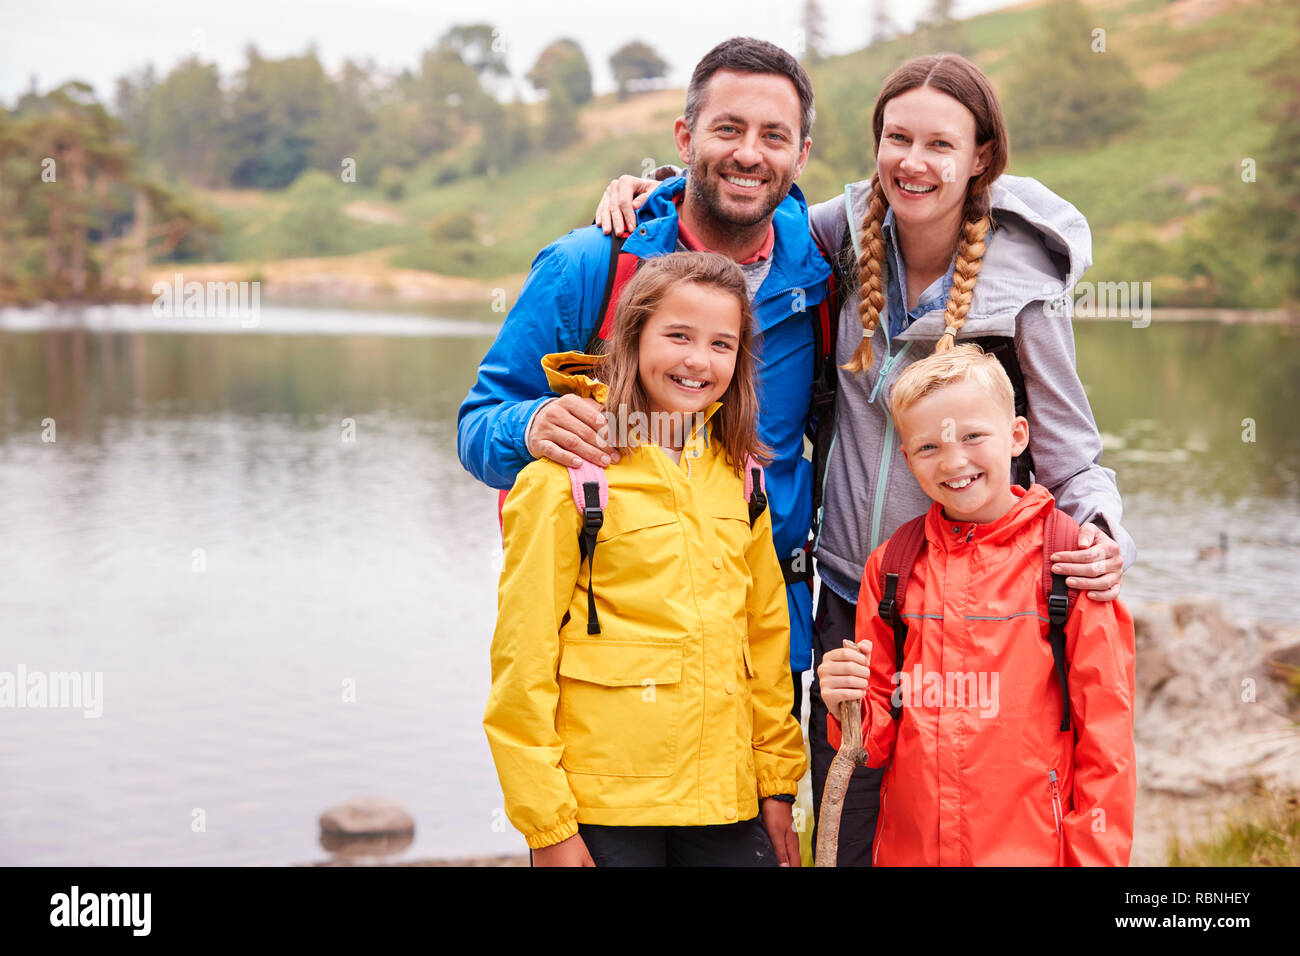 Young family standing on the shore of a lake in the countryside looking to camera smiling, Lake District, UK Stock Photo